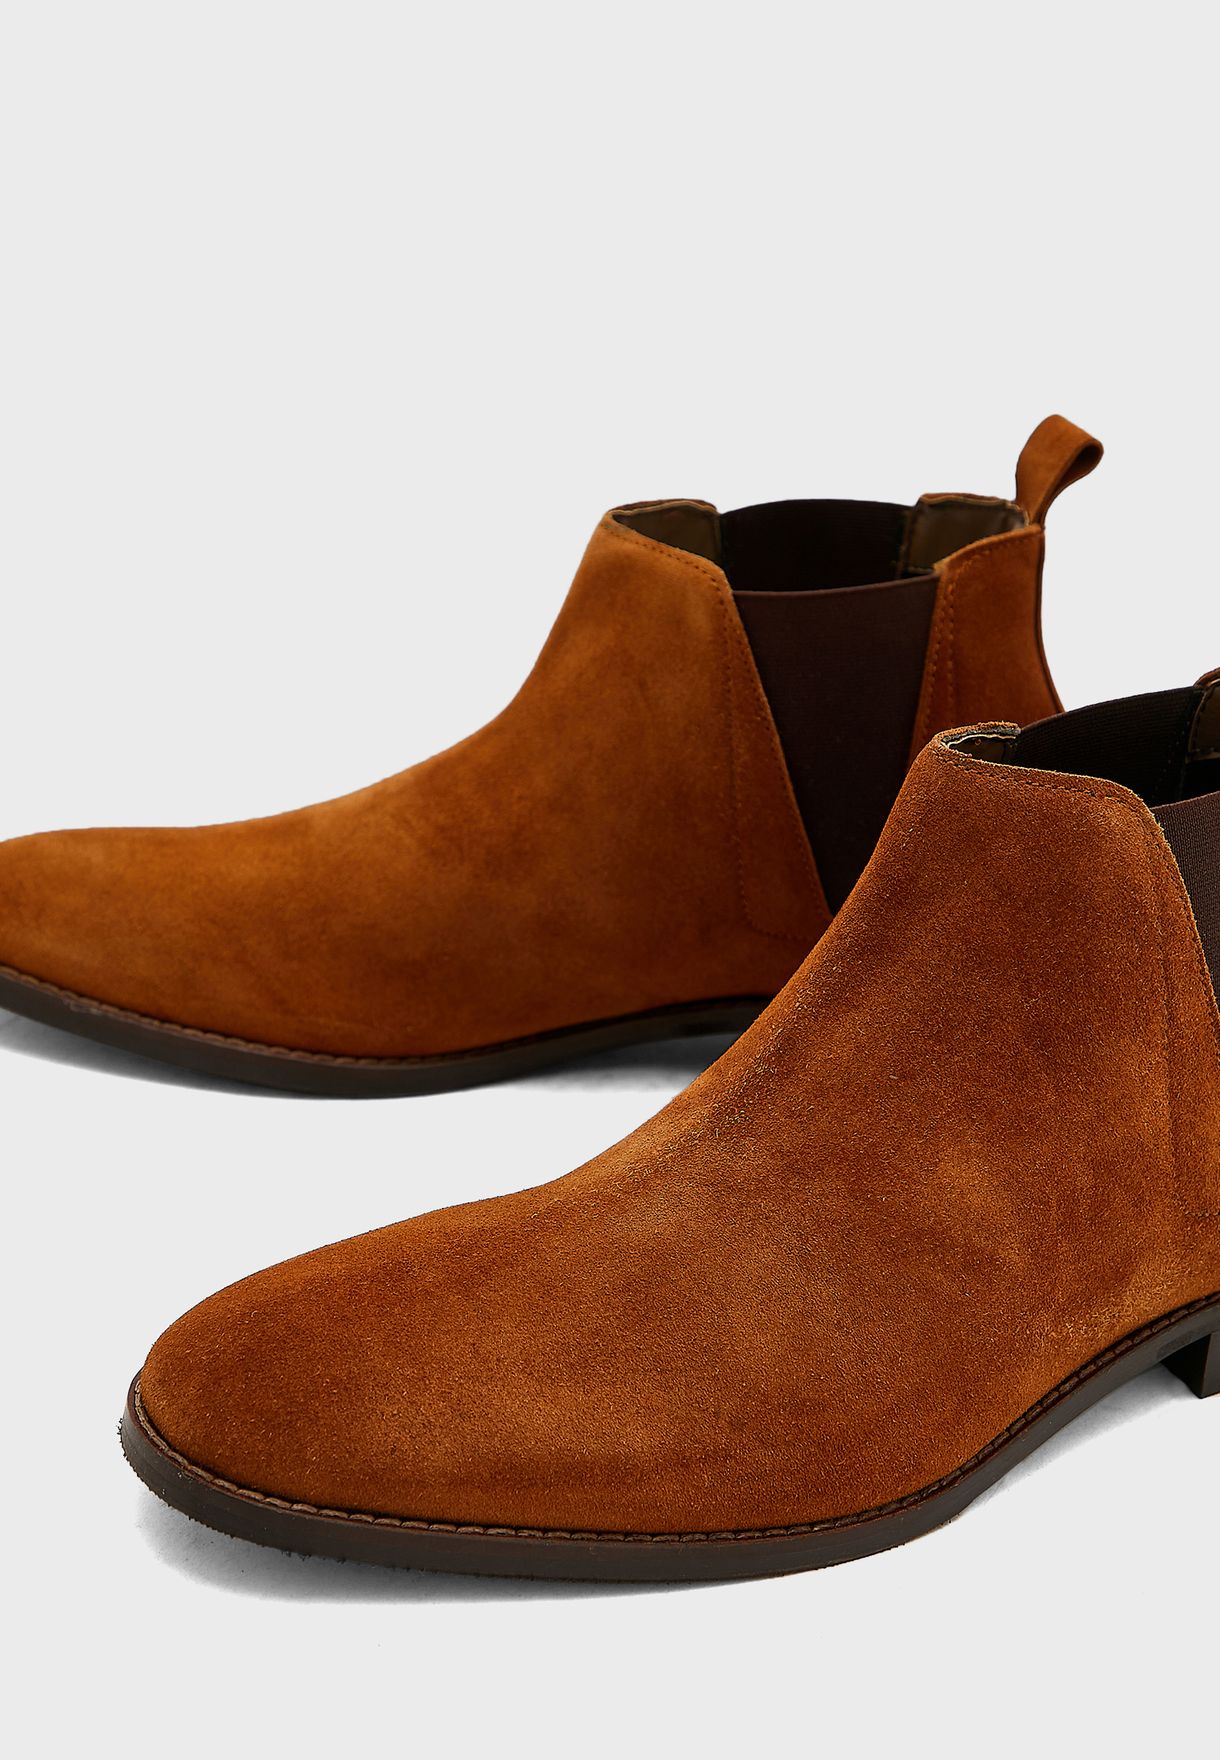 Genuine Suede Leather Chelsea Boots